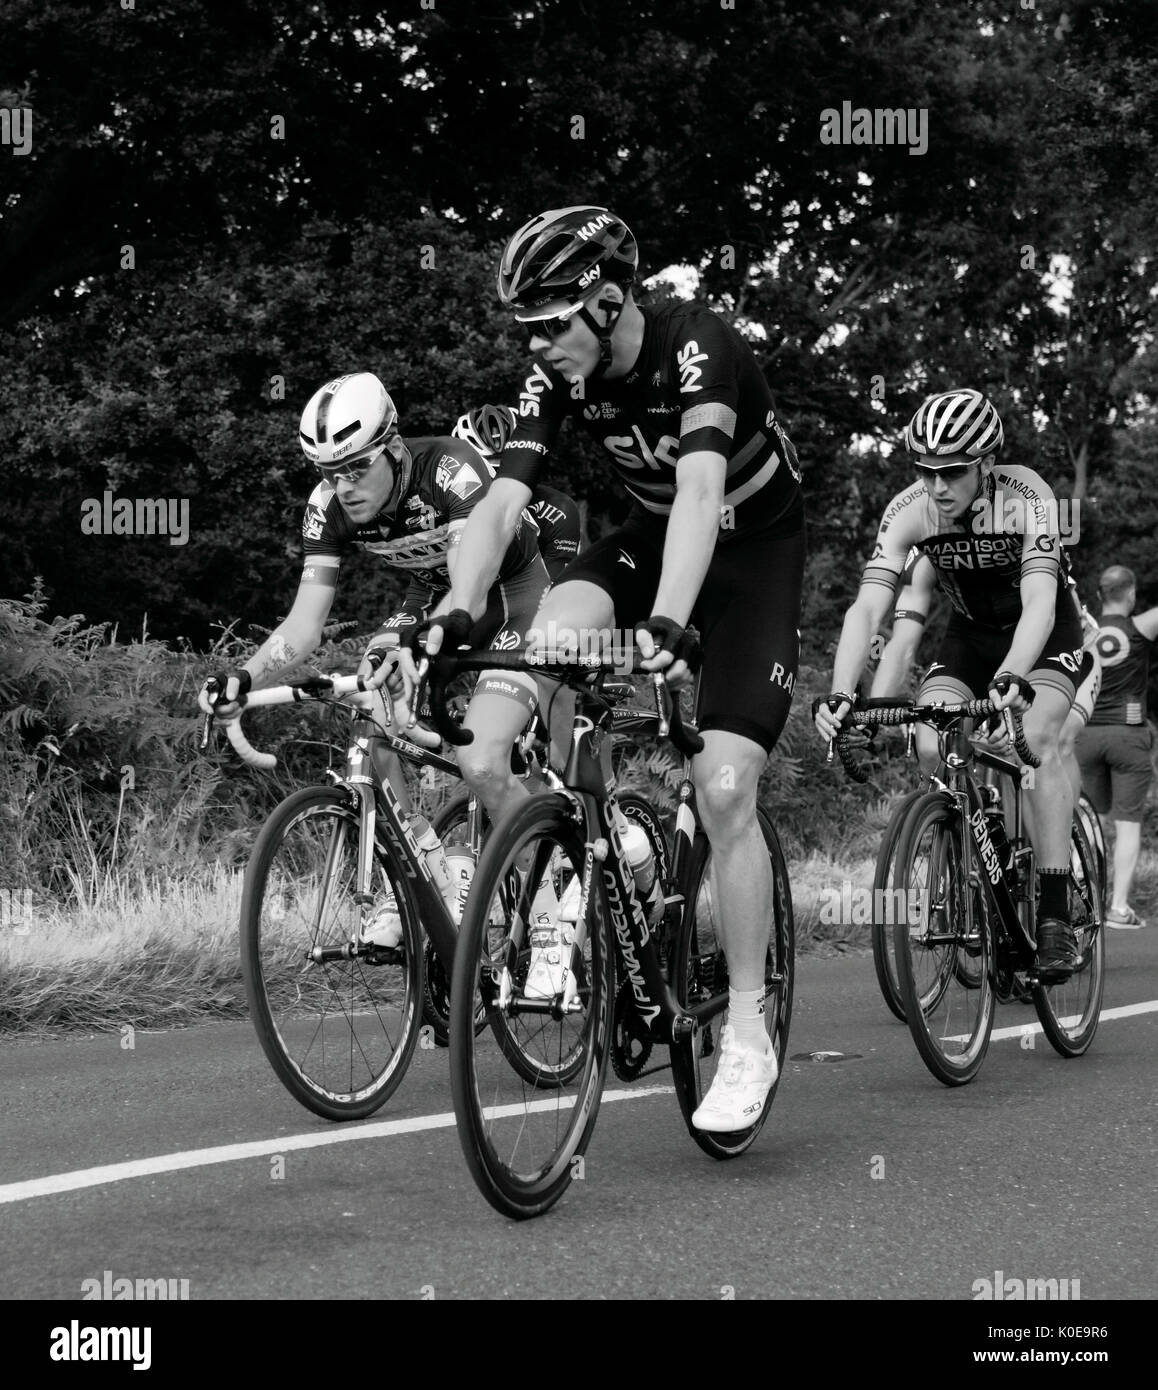 Christopher Froome (GBR) Team Sky 2016 Ride Londra Surrey Classic Cycle Race 30 luglio 2016 Ranmore Common Road Surrey Hills Surrey UK Foto Stock